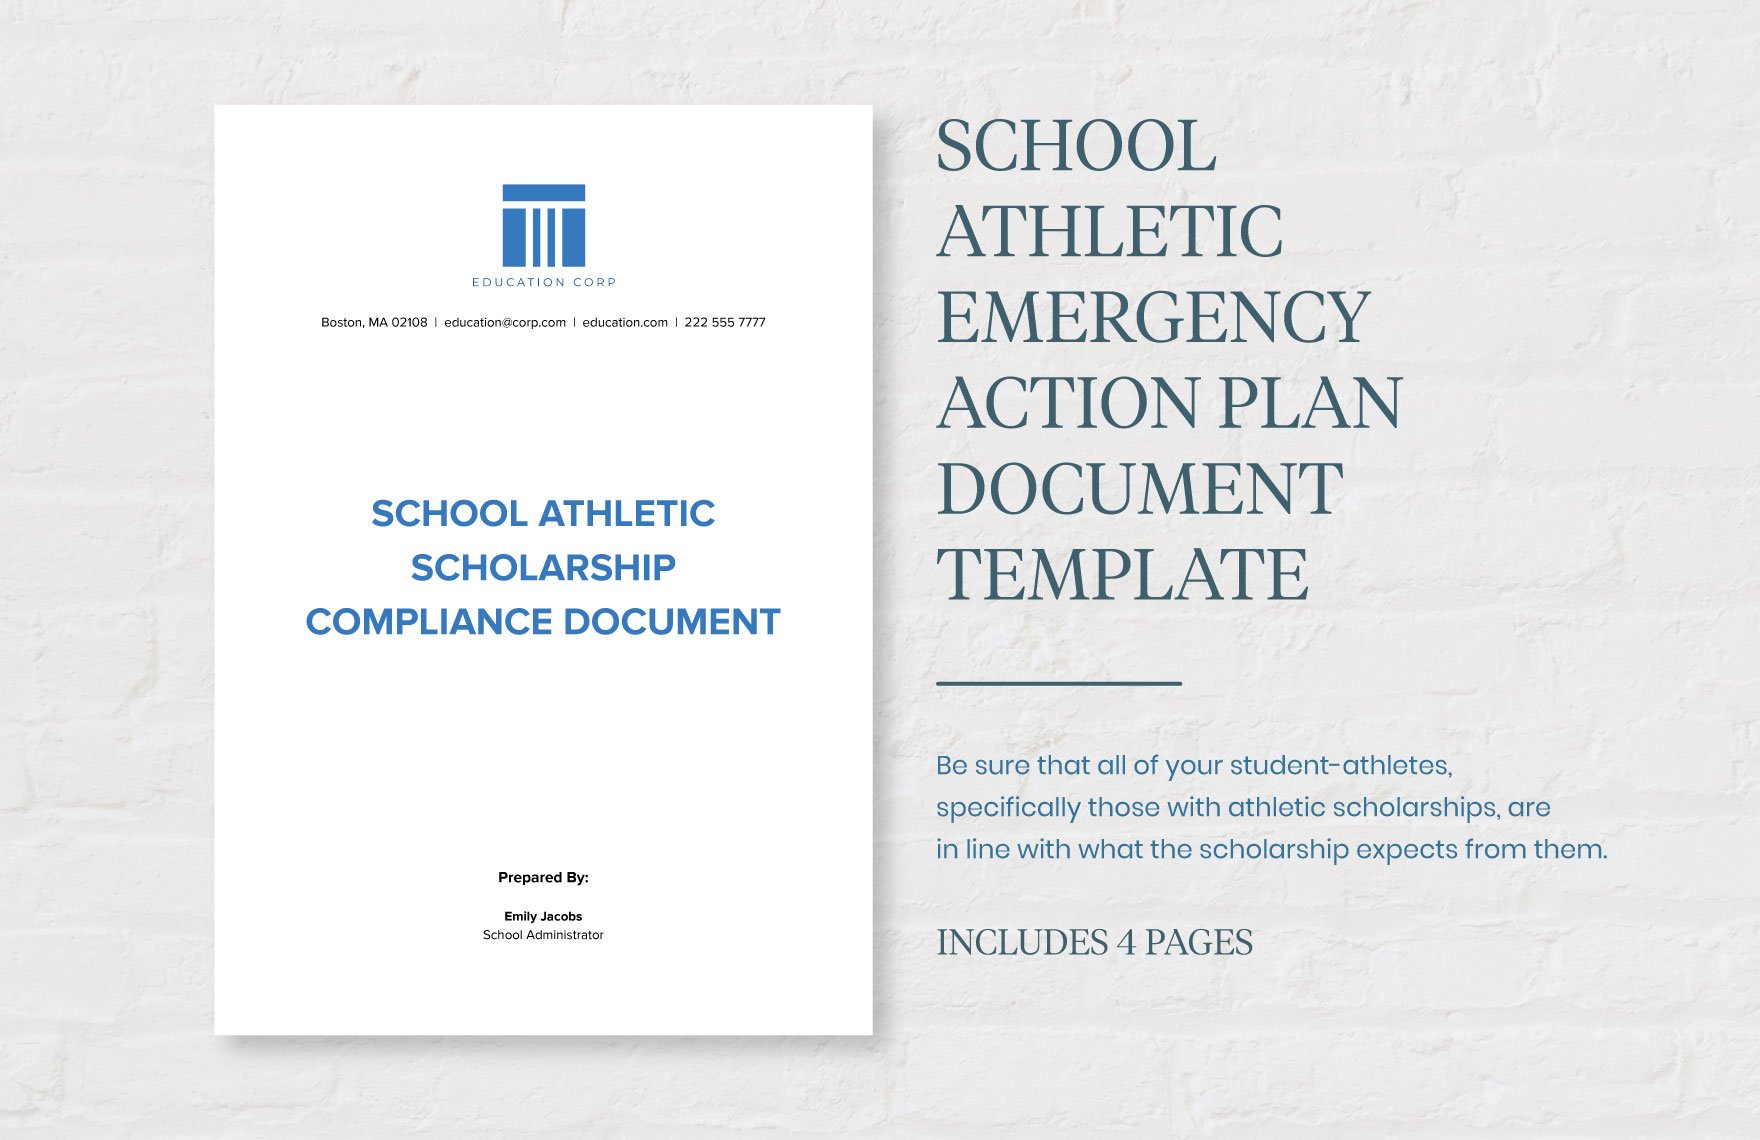 School Athletic Emergency Action Plan Document Template